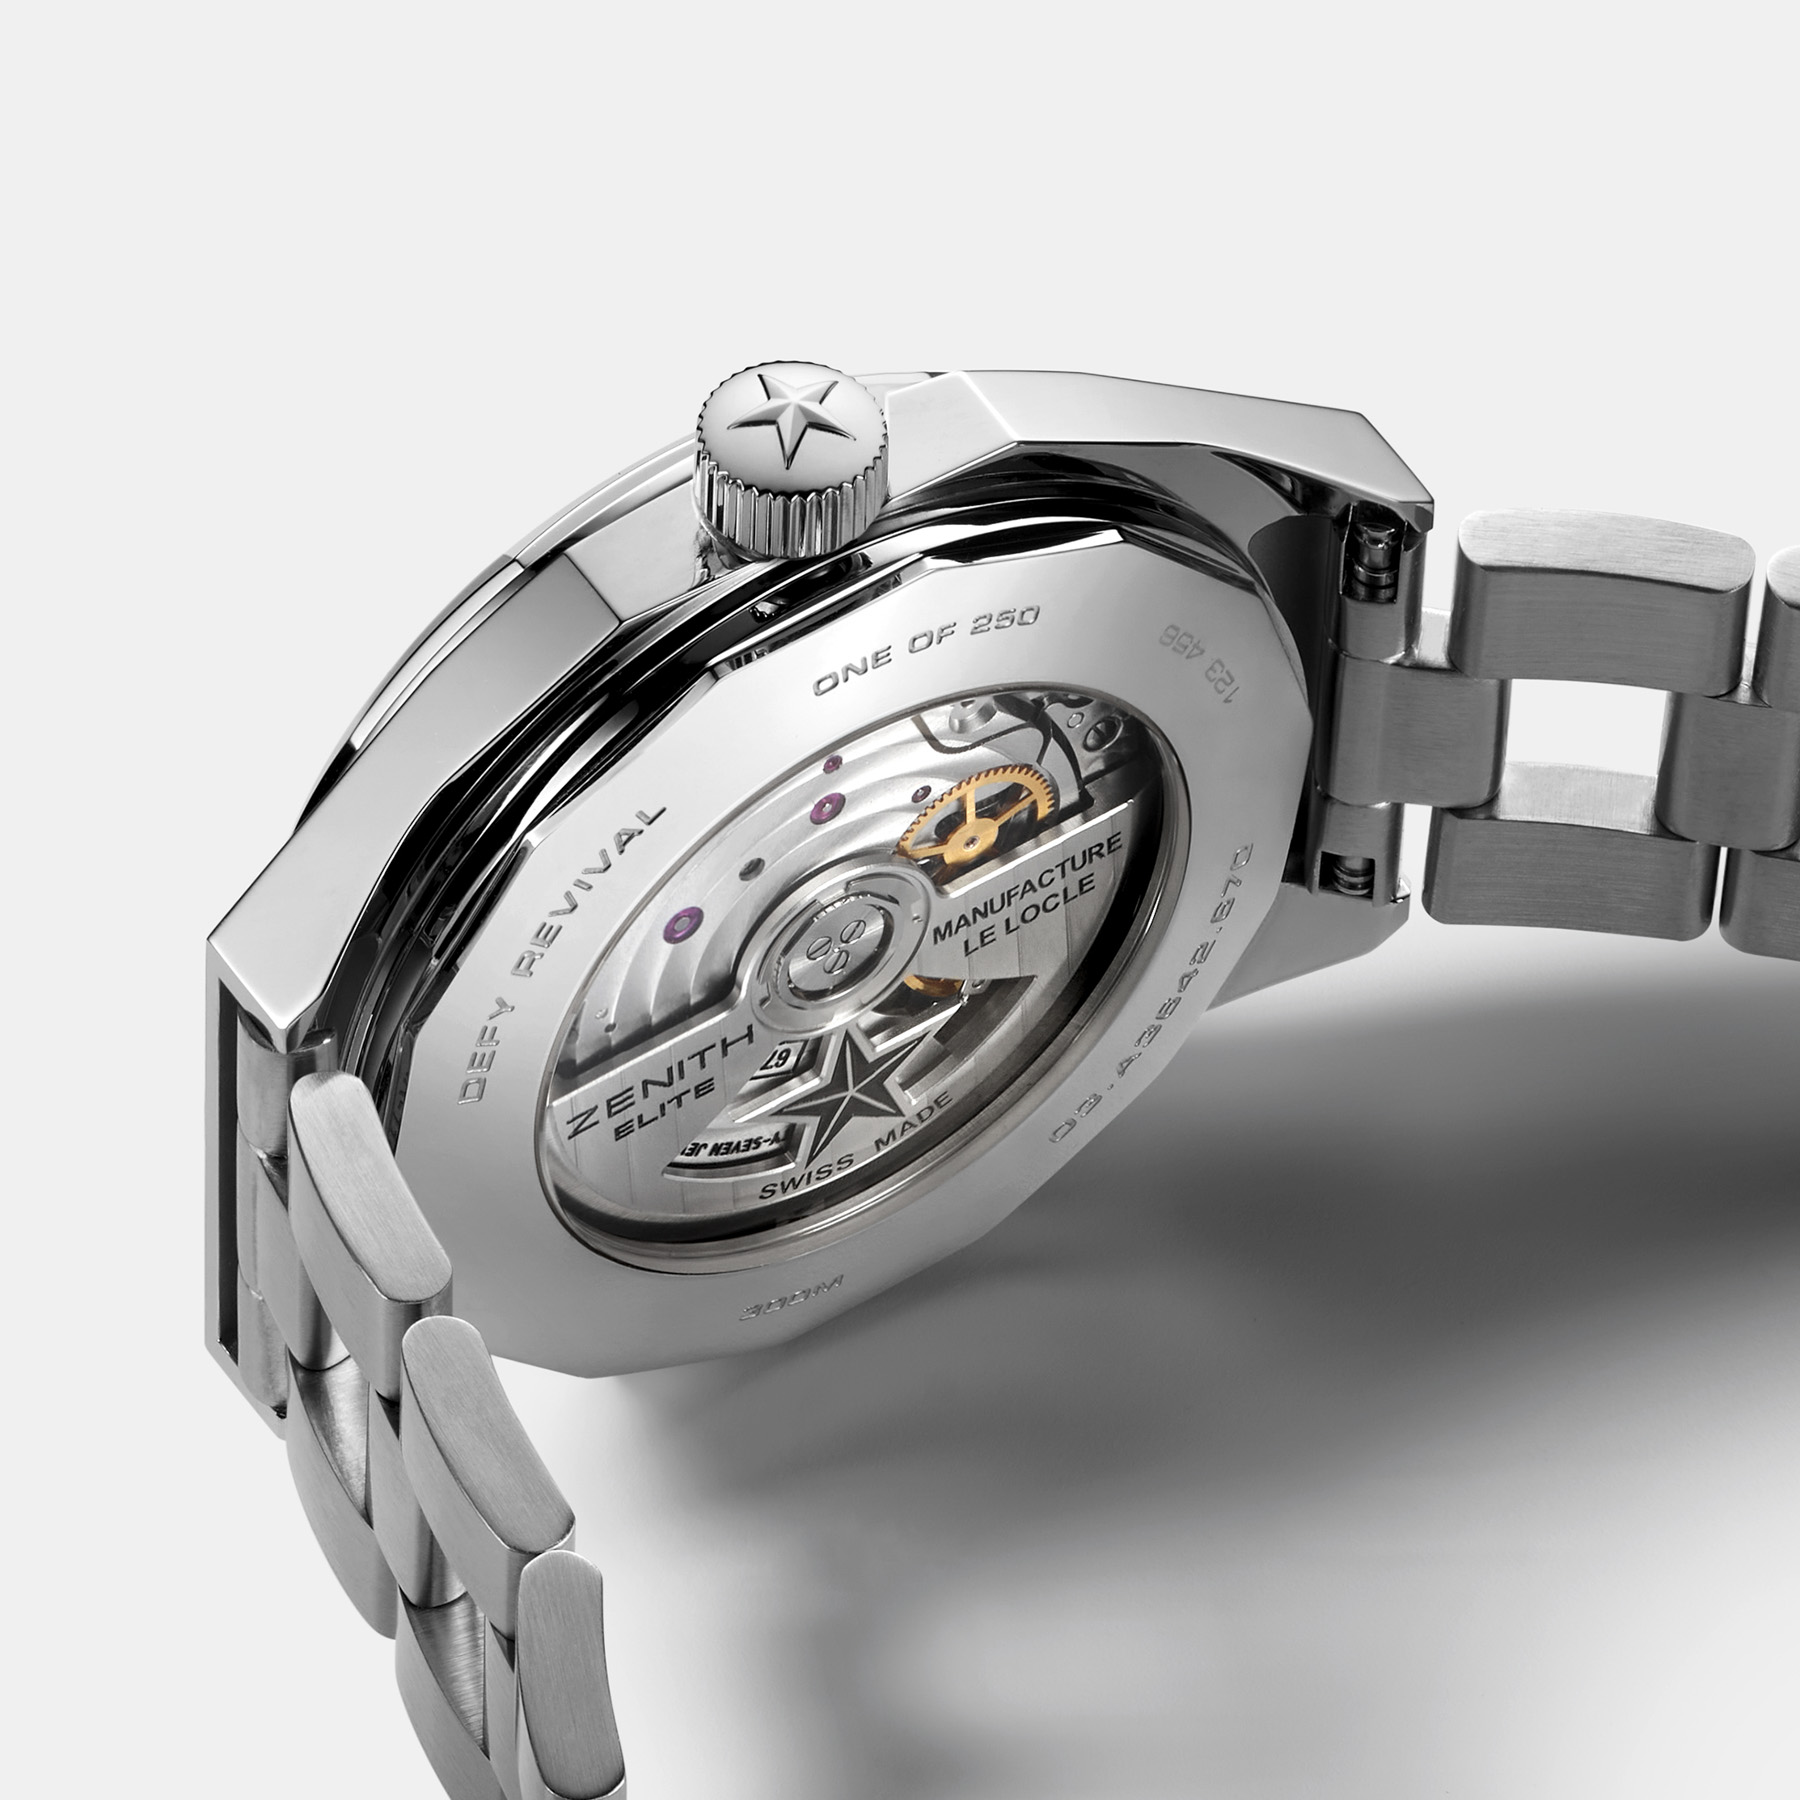 Zenith Pushes the Boundaries of Progressive Watchmaking with the